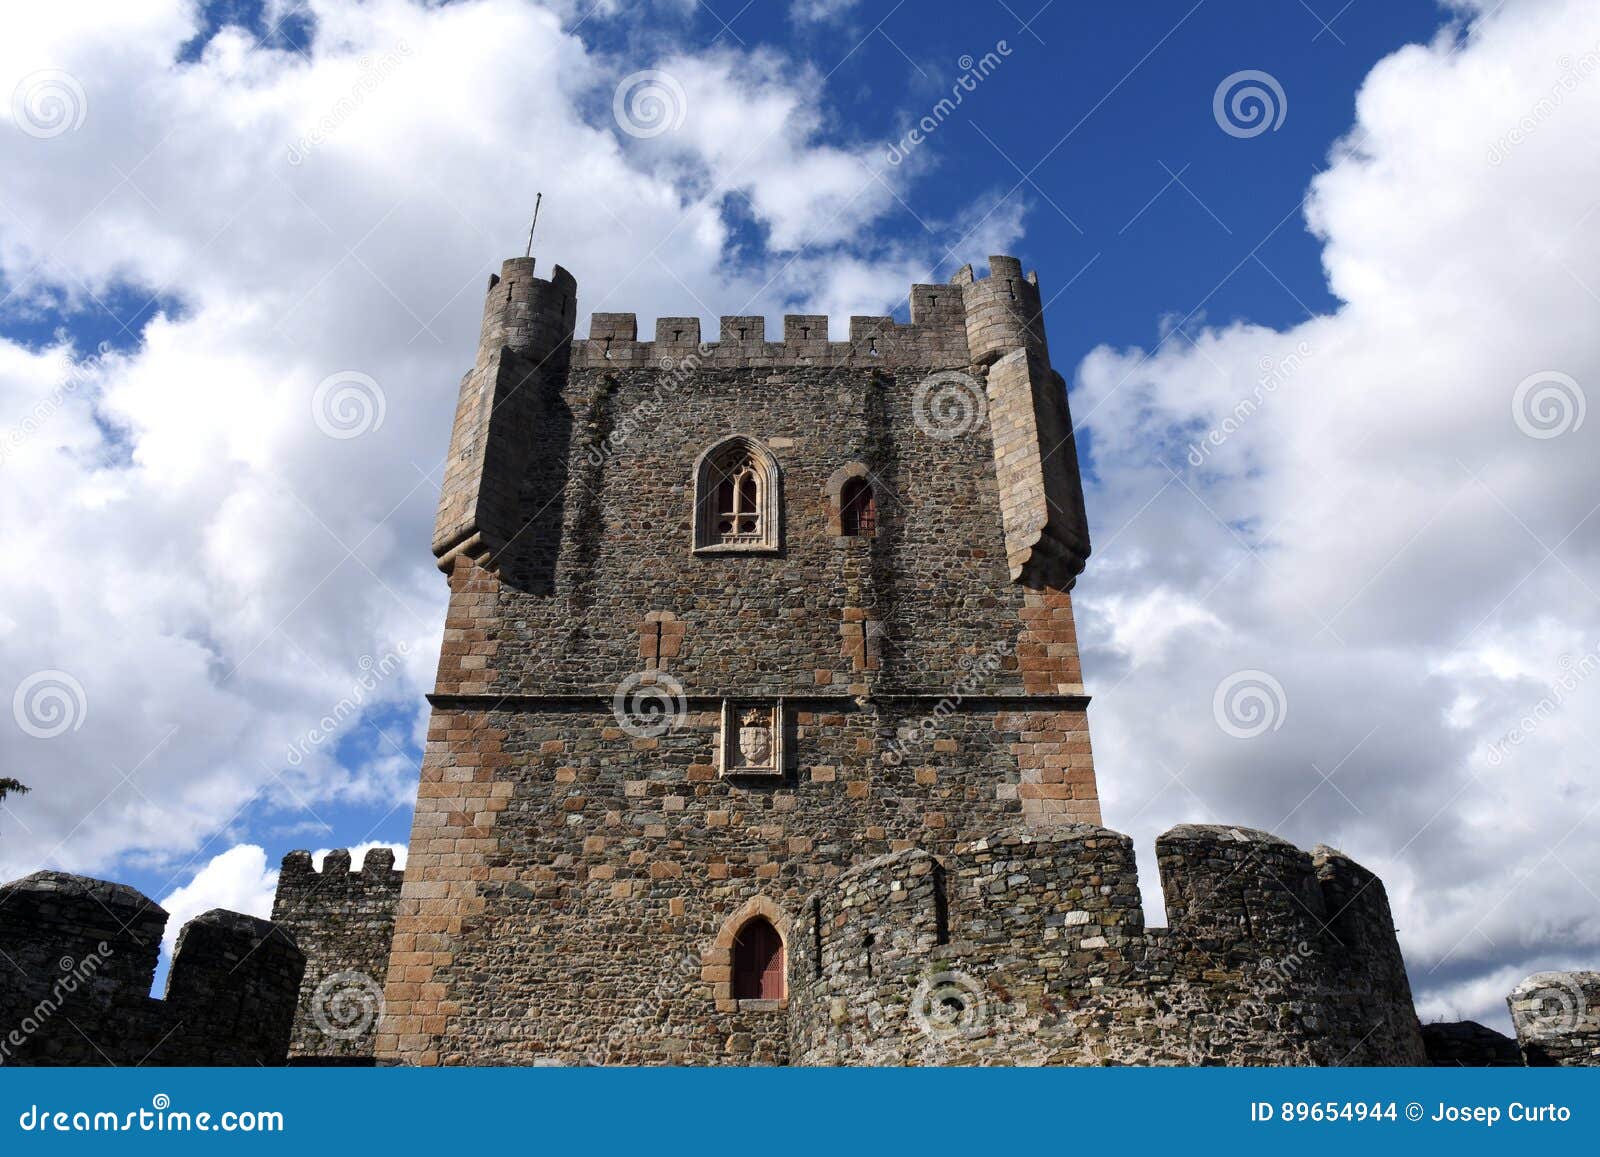 tower of castle of braganca,tras os montes